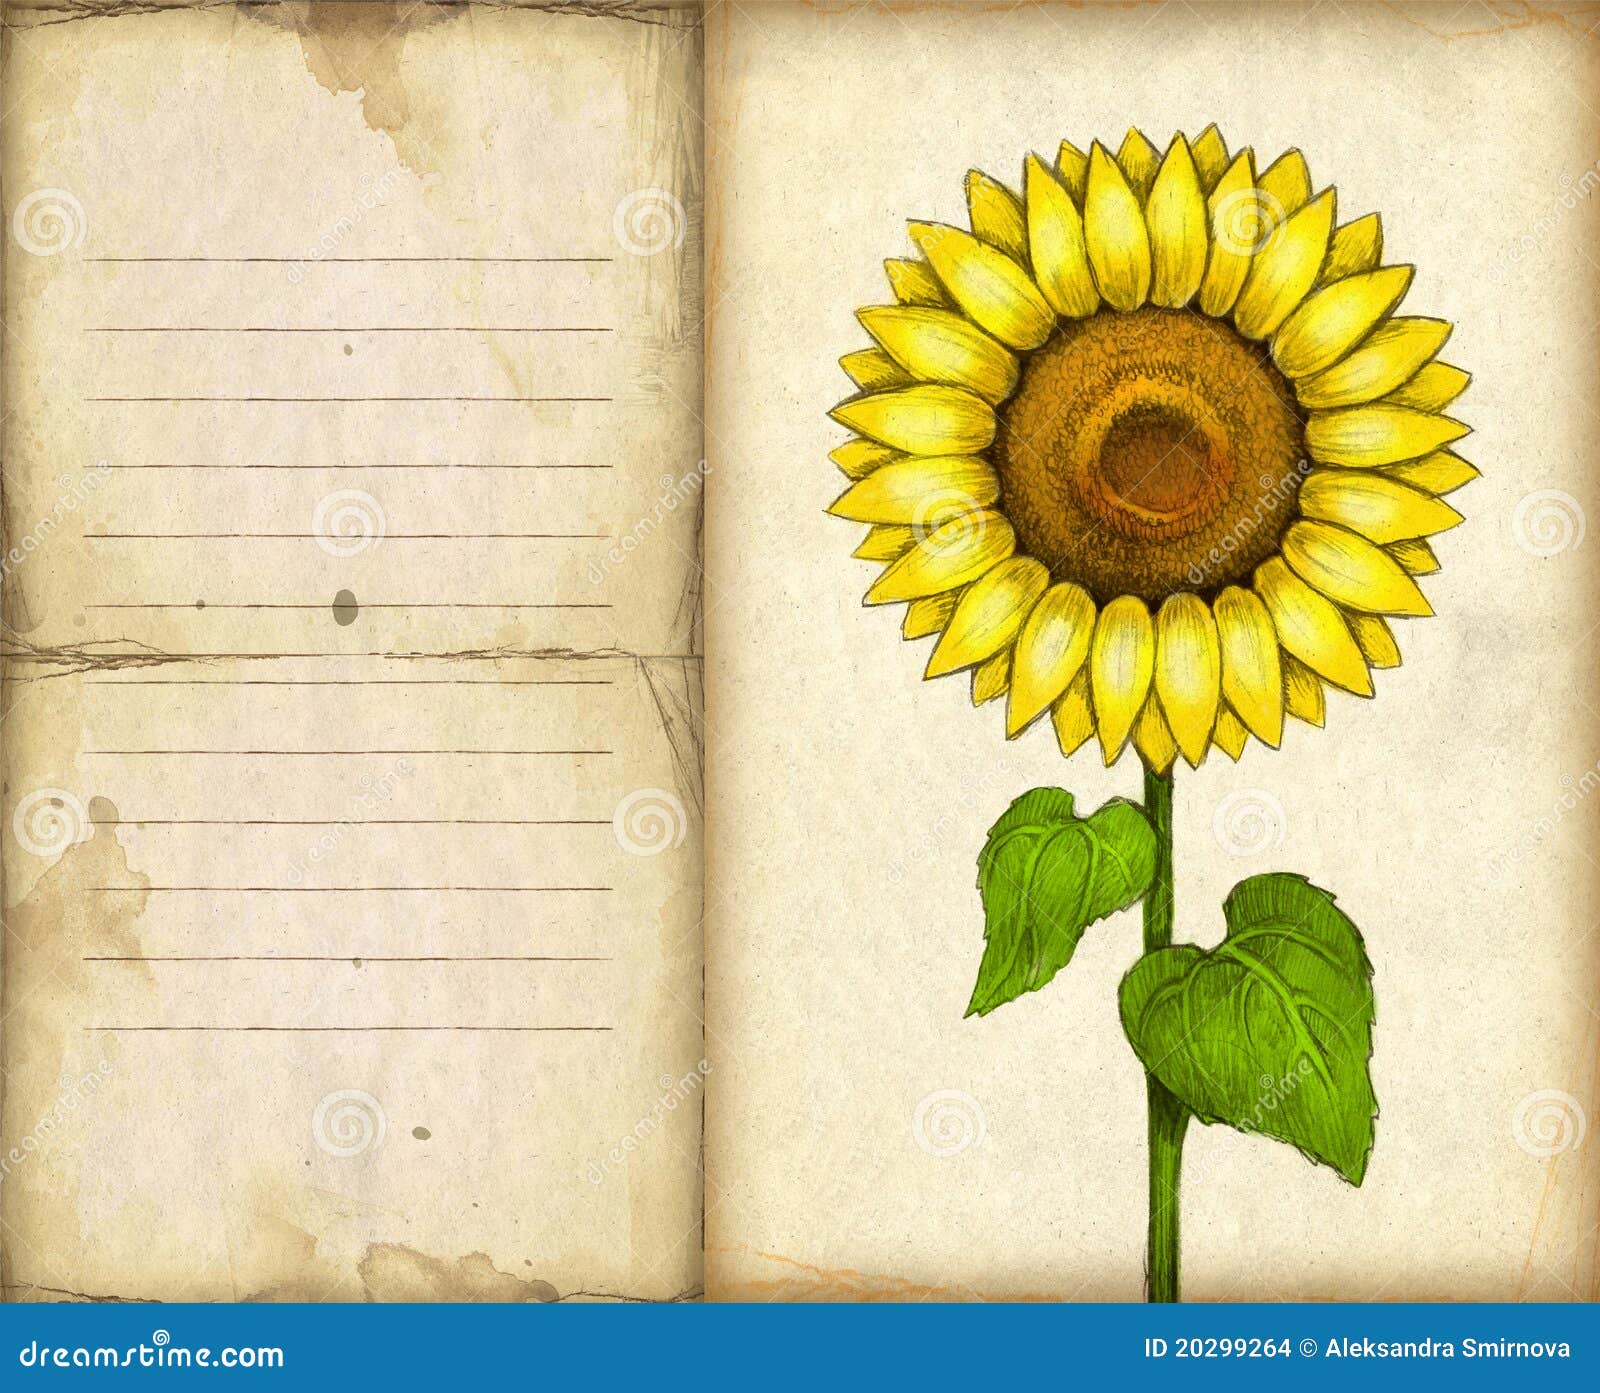 Background With Drawing Of Sunflower Stock Illustration